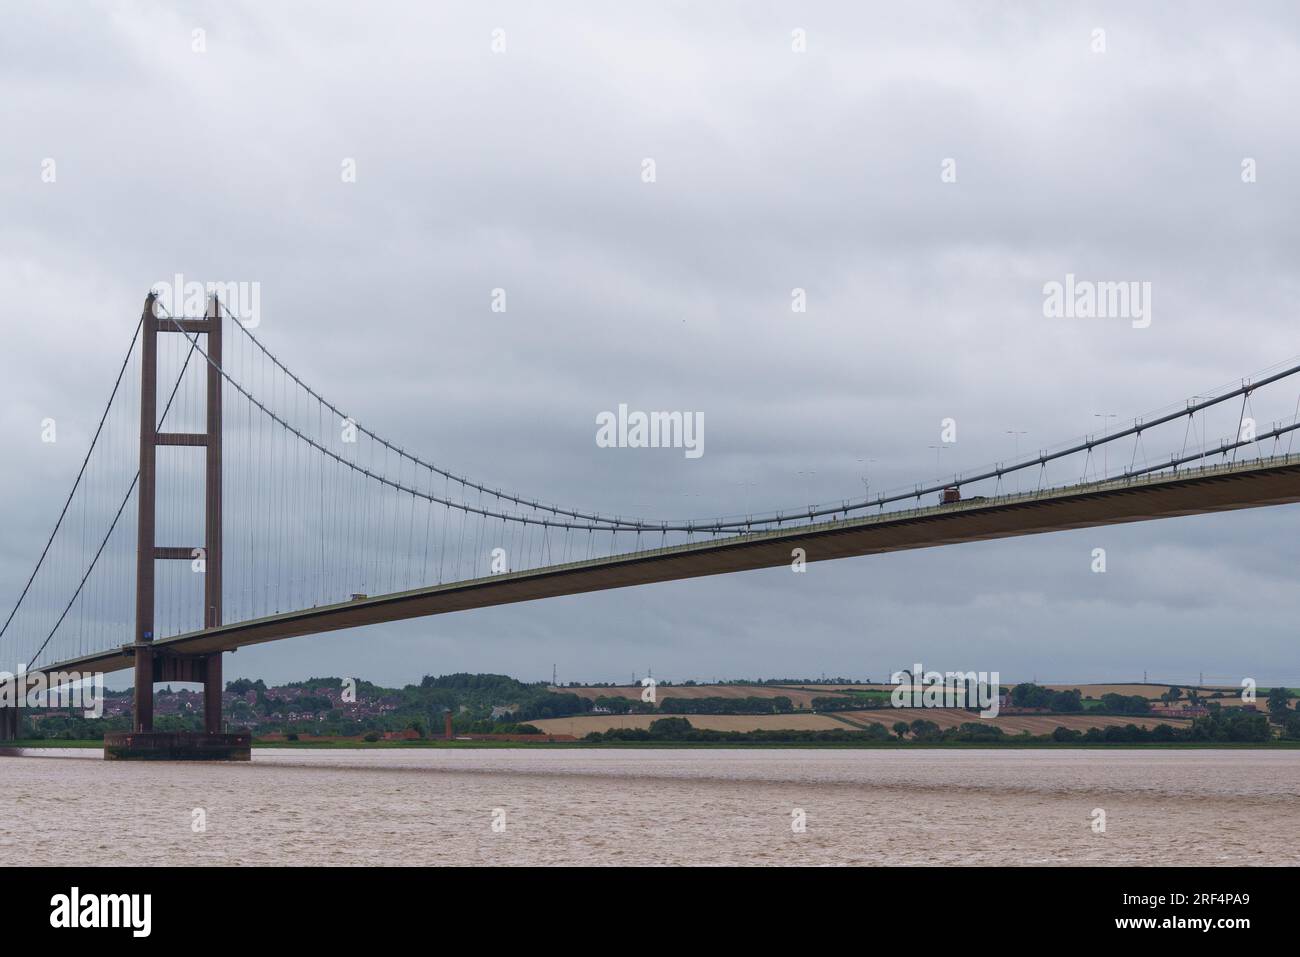 The Humber Bridge (East Yorkshire) on a gloomy windswept day, looking south towards Barton-on-Humber. World's 12th largest single span bridge. Stock Photo